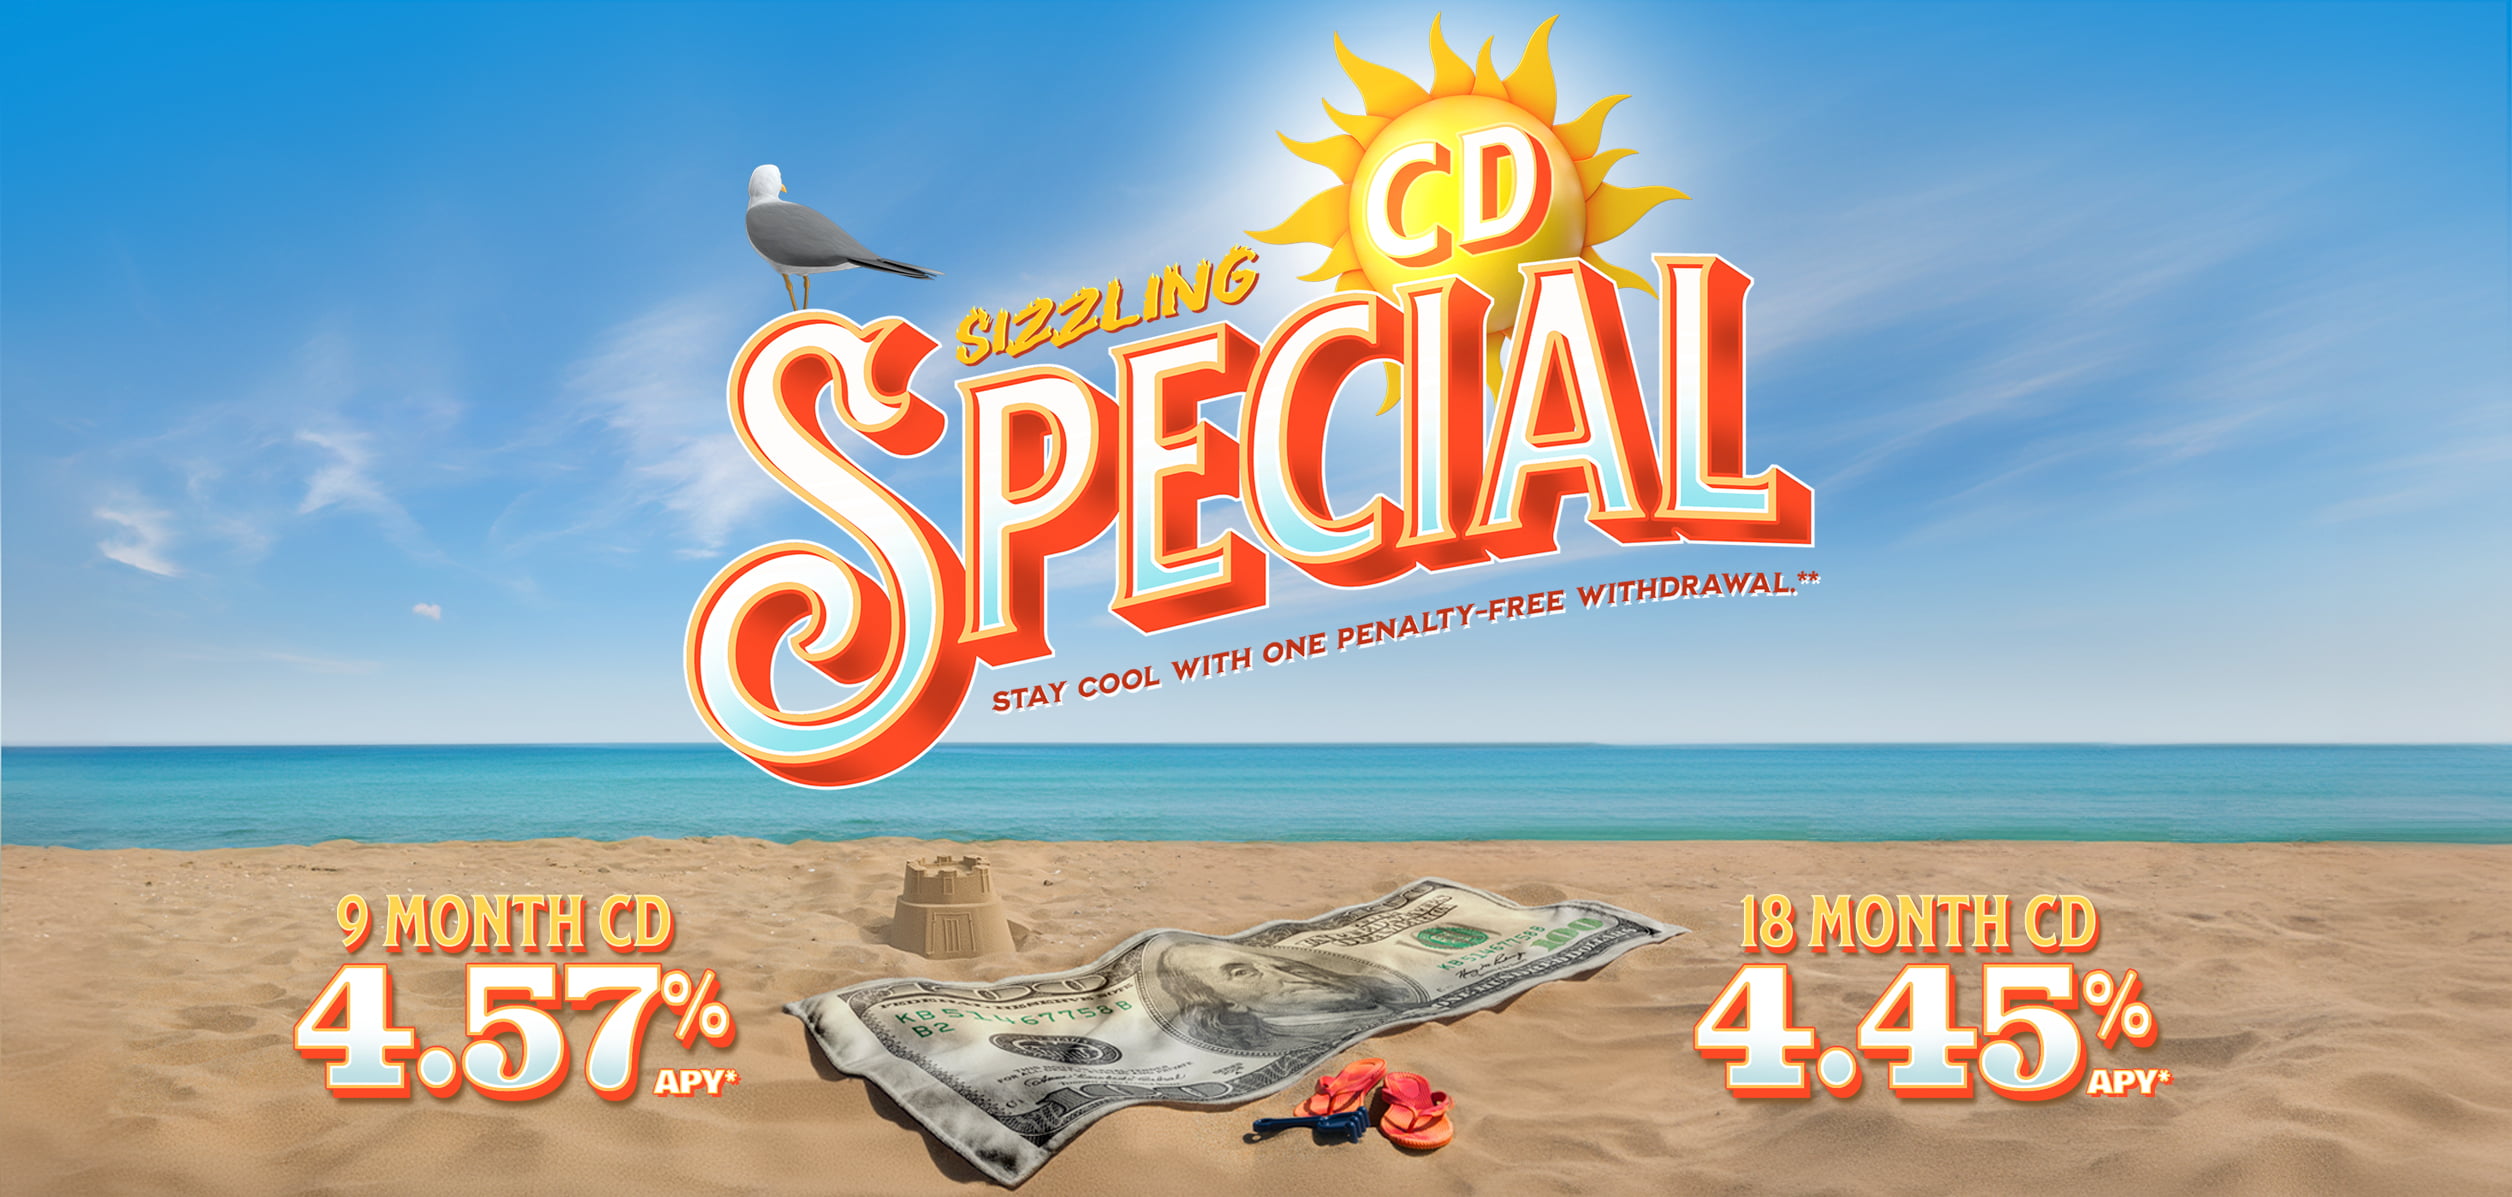 Sizzling Special Stay Cool with One Penalty-Free Withdrawal** 9 Month CD for 4.57% APY and 18 Month CD for 4.45% APY